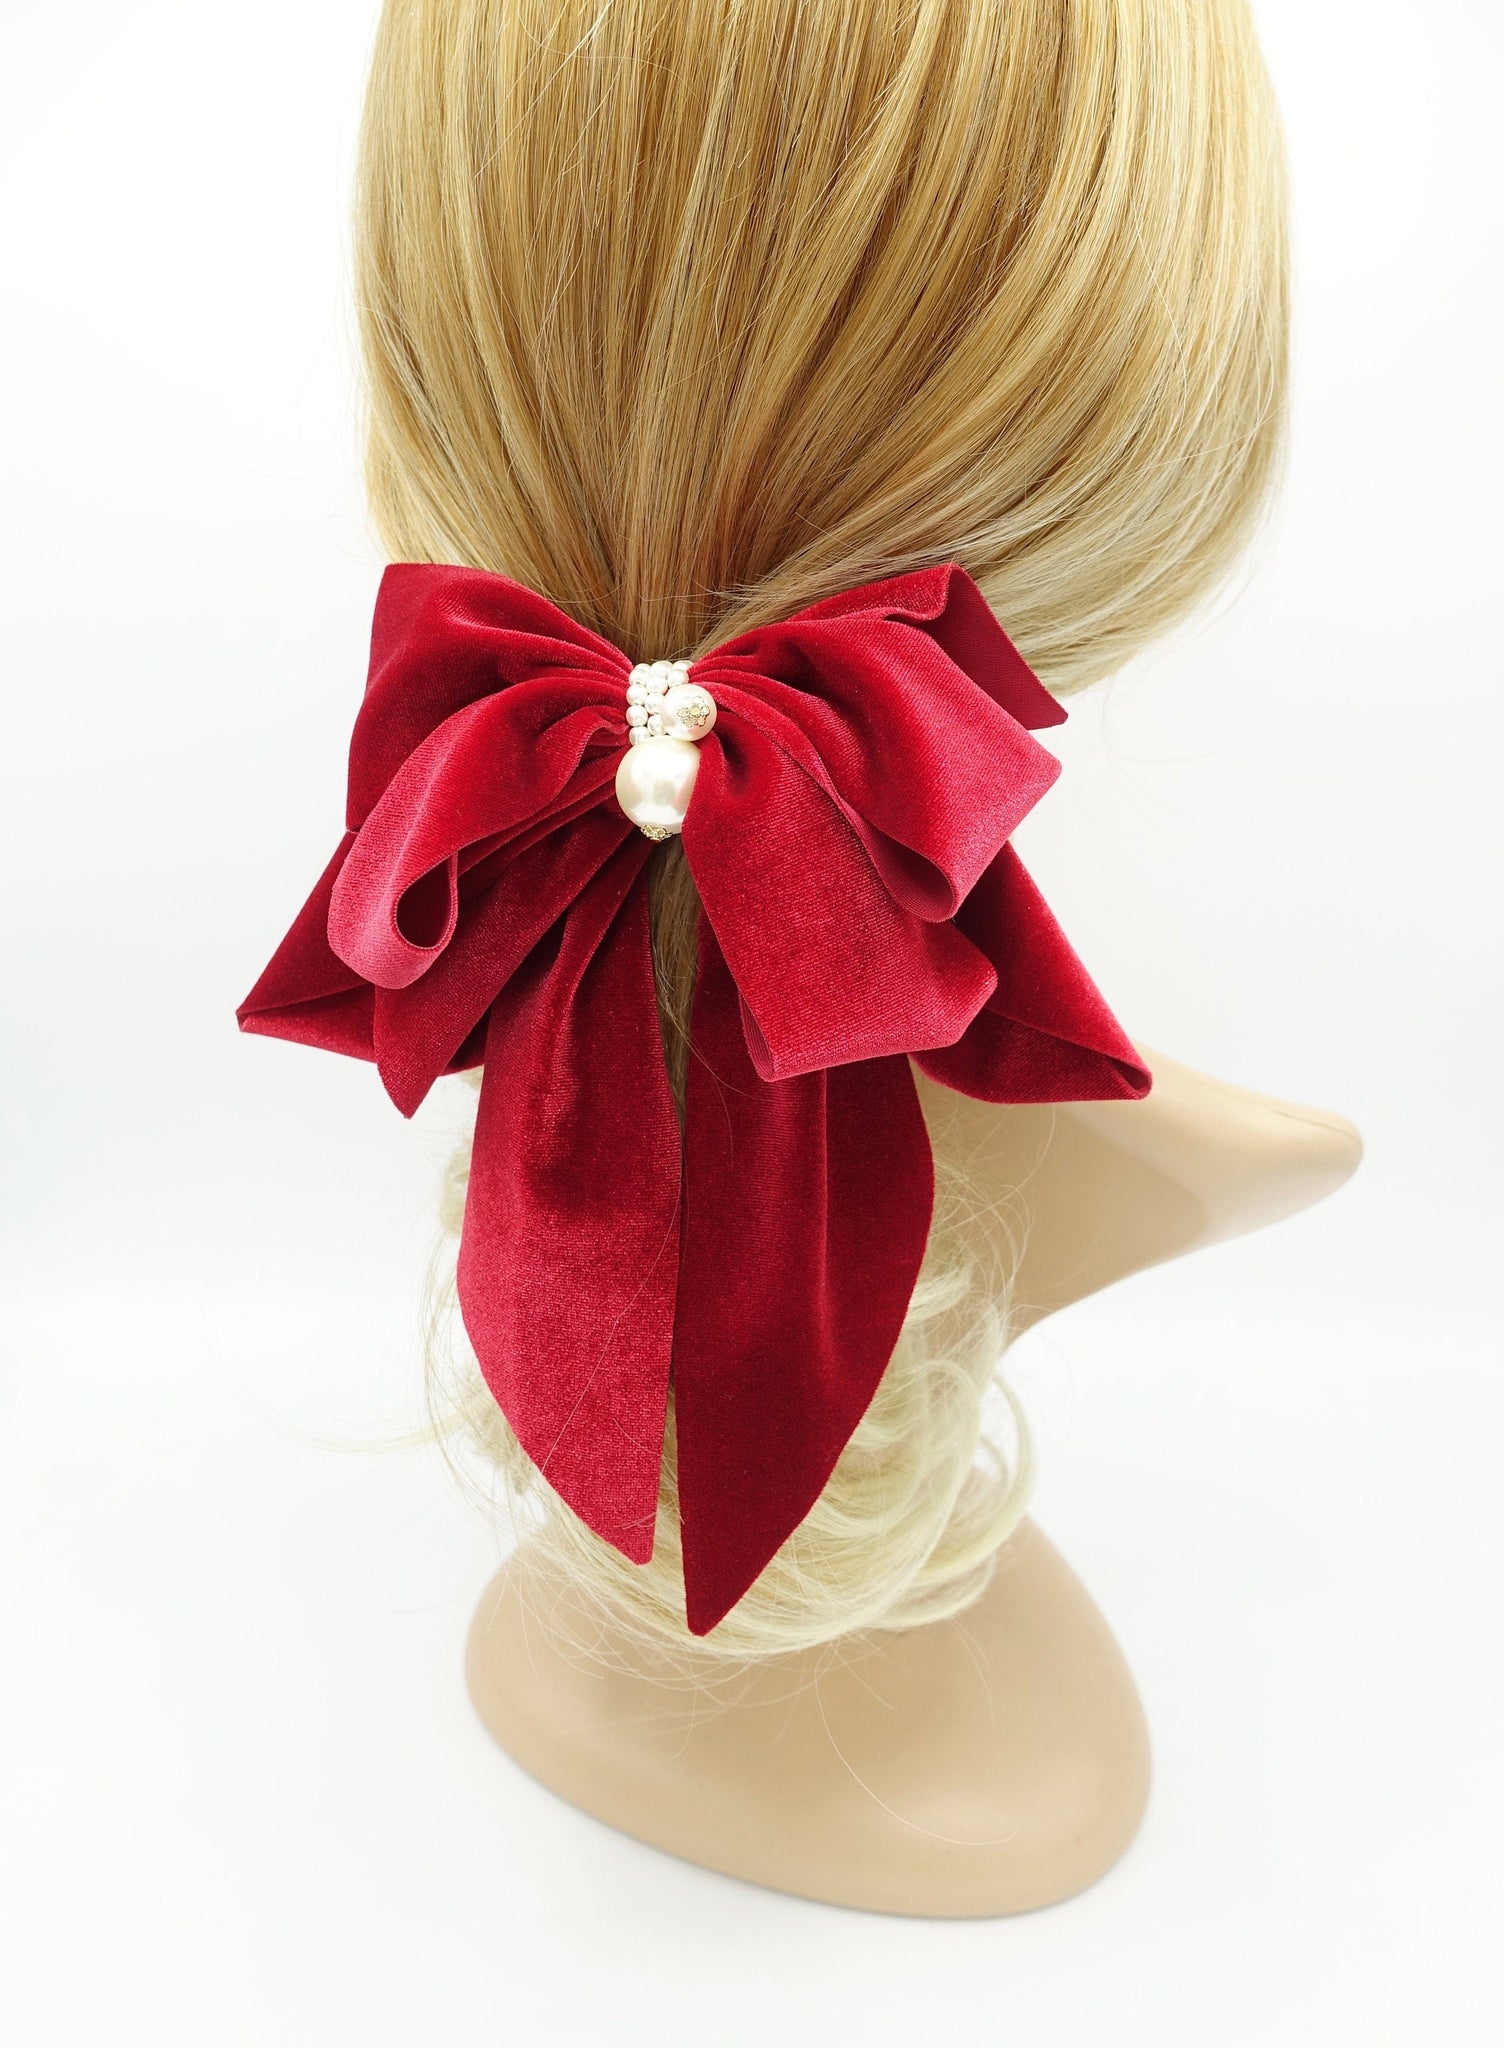 1 Pcs Large Wine Red Velvet with Pearls Hair Bow Bowtie Hair Clip